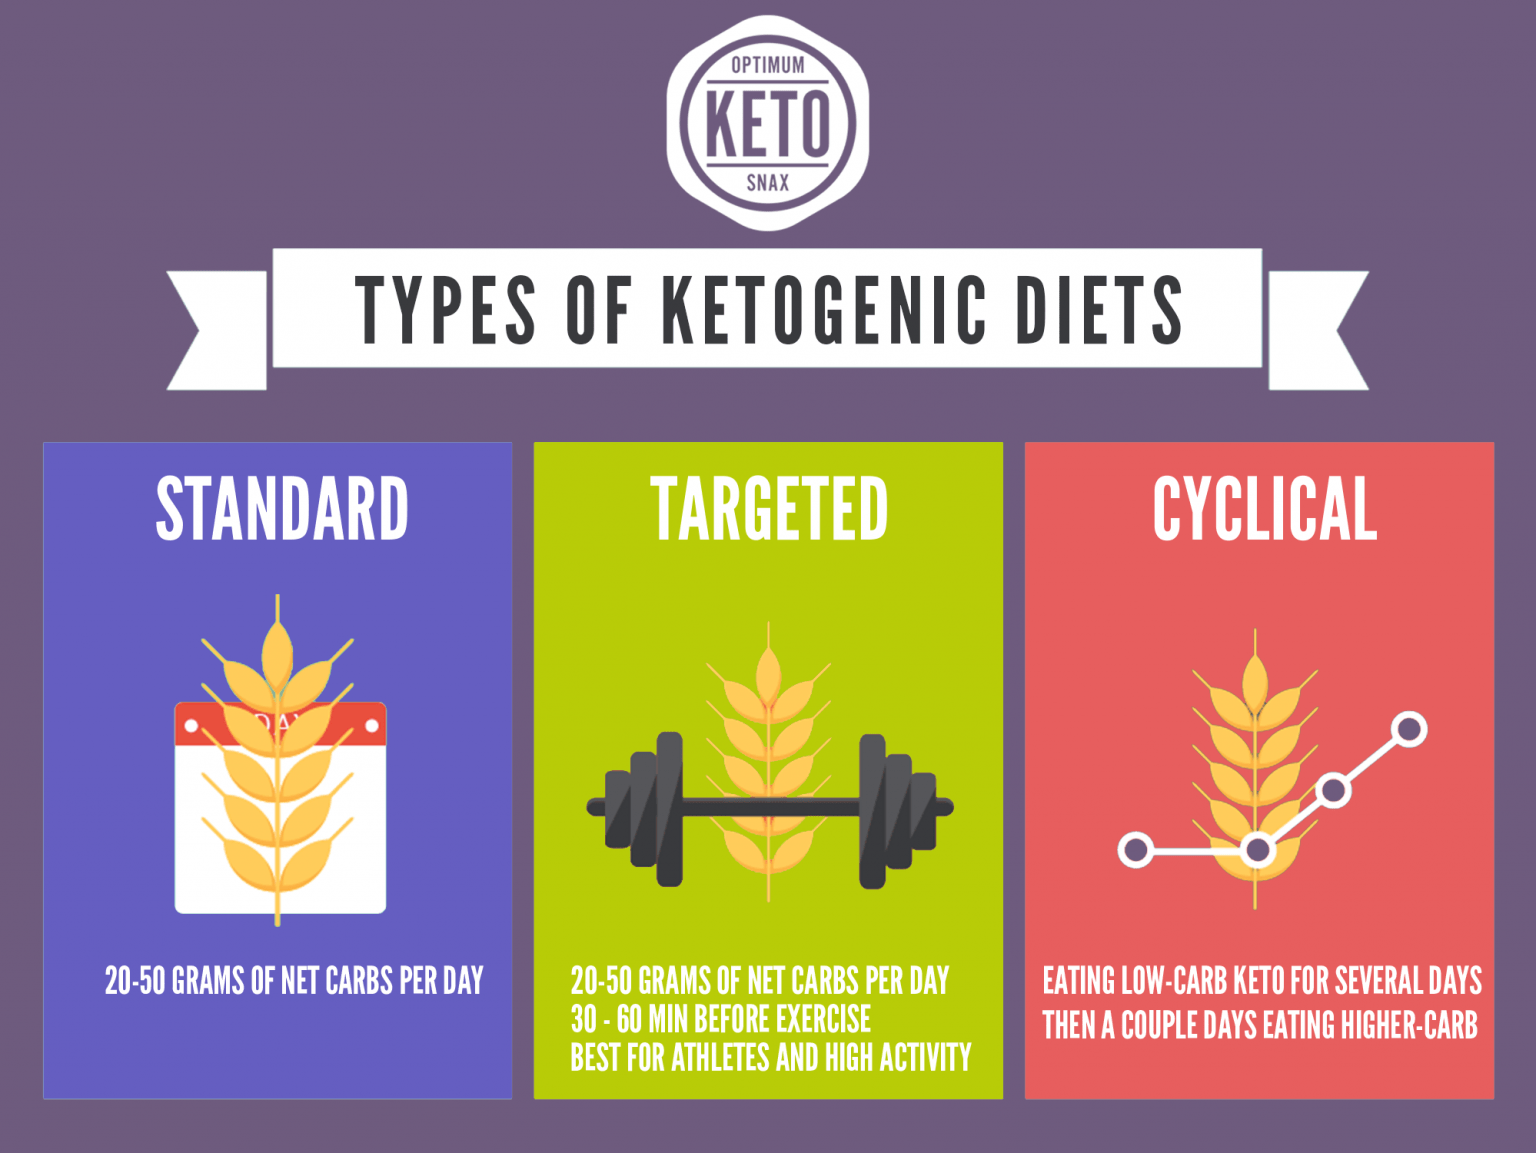 research articles on ketogenic diet